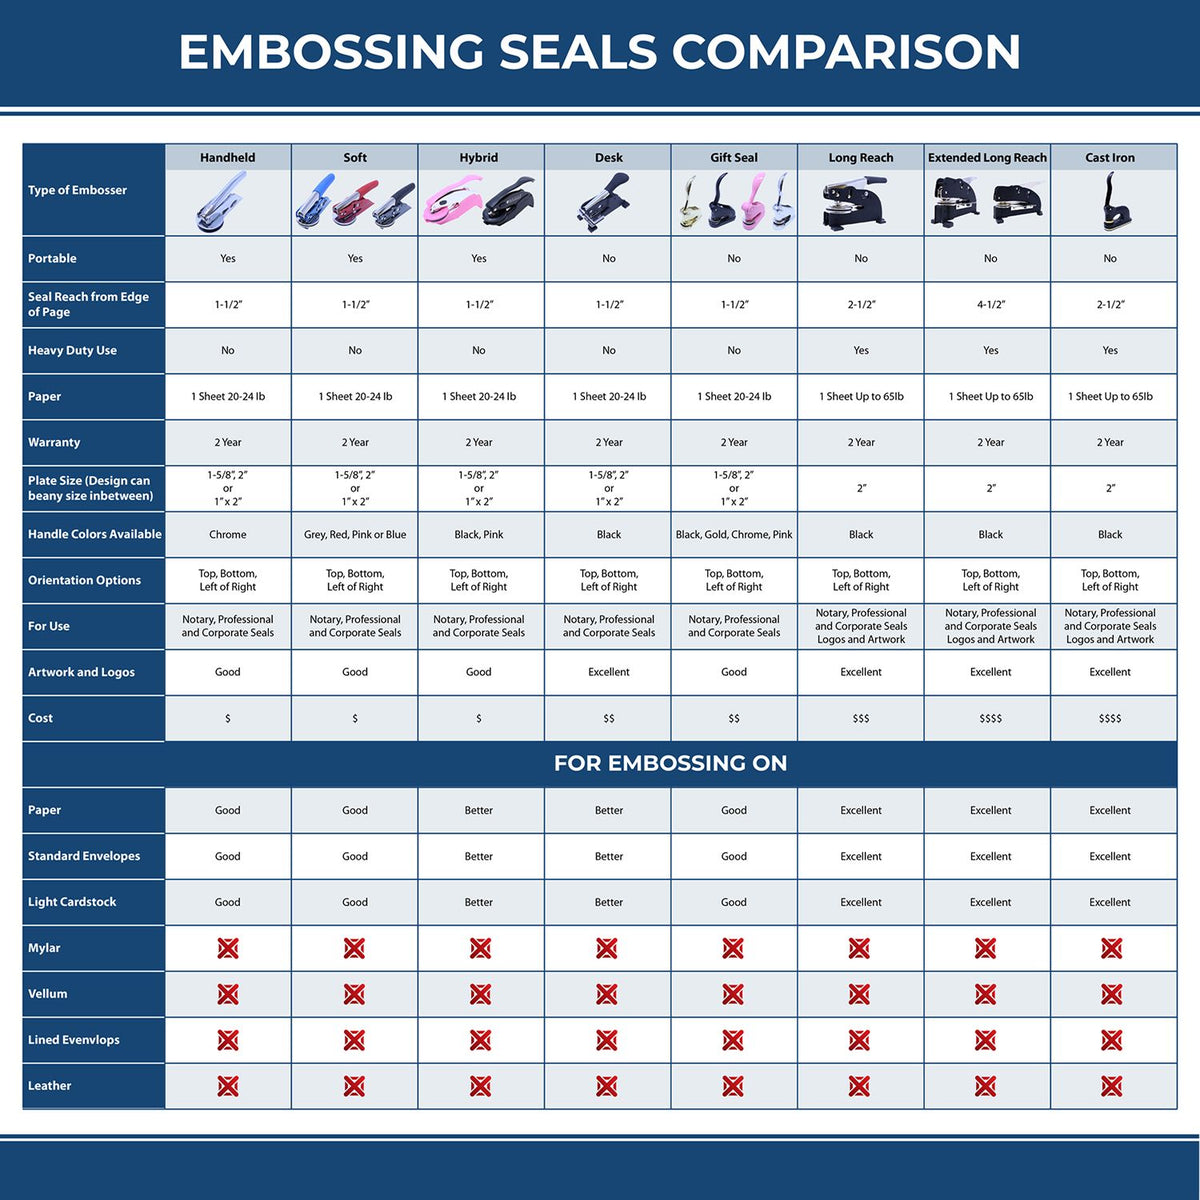 A comparison chart for the different types of mount models available for the Soft Pocket Alaska Landscape Architect Embosser.